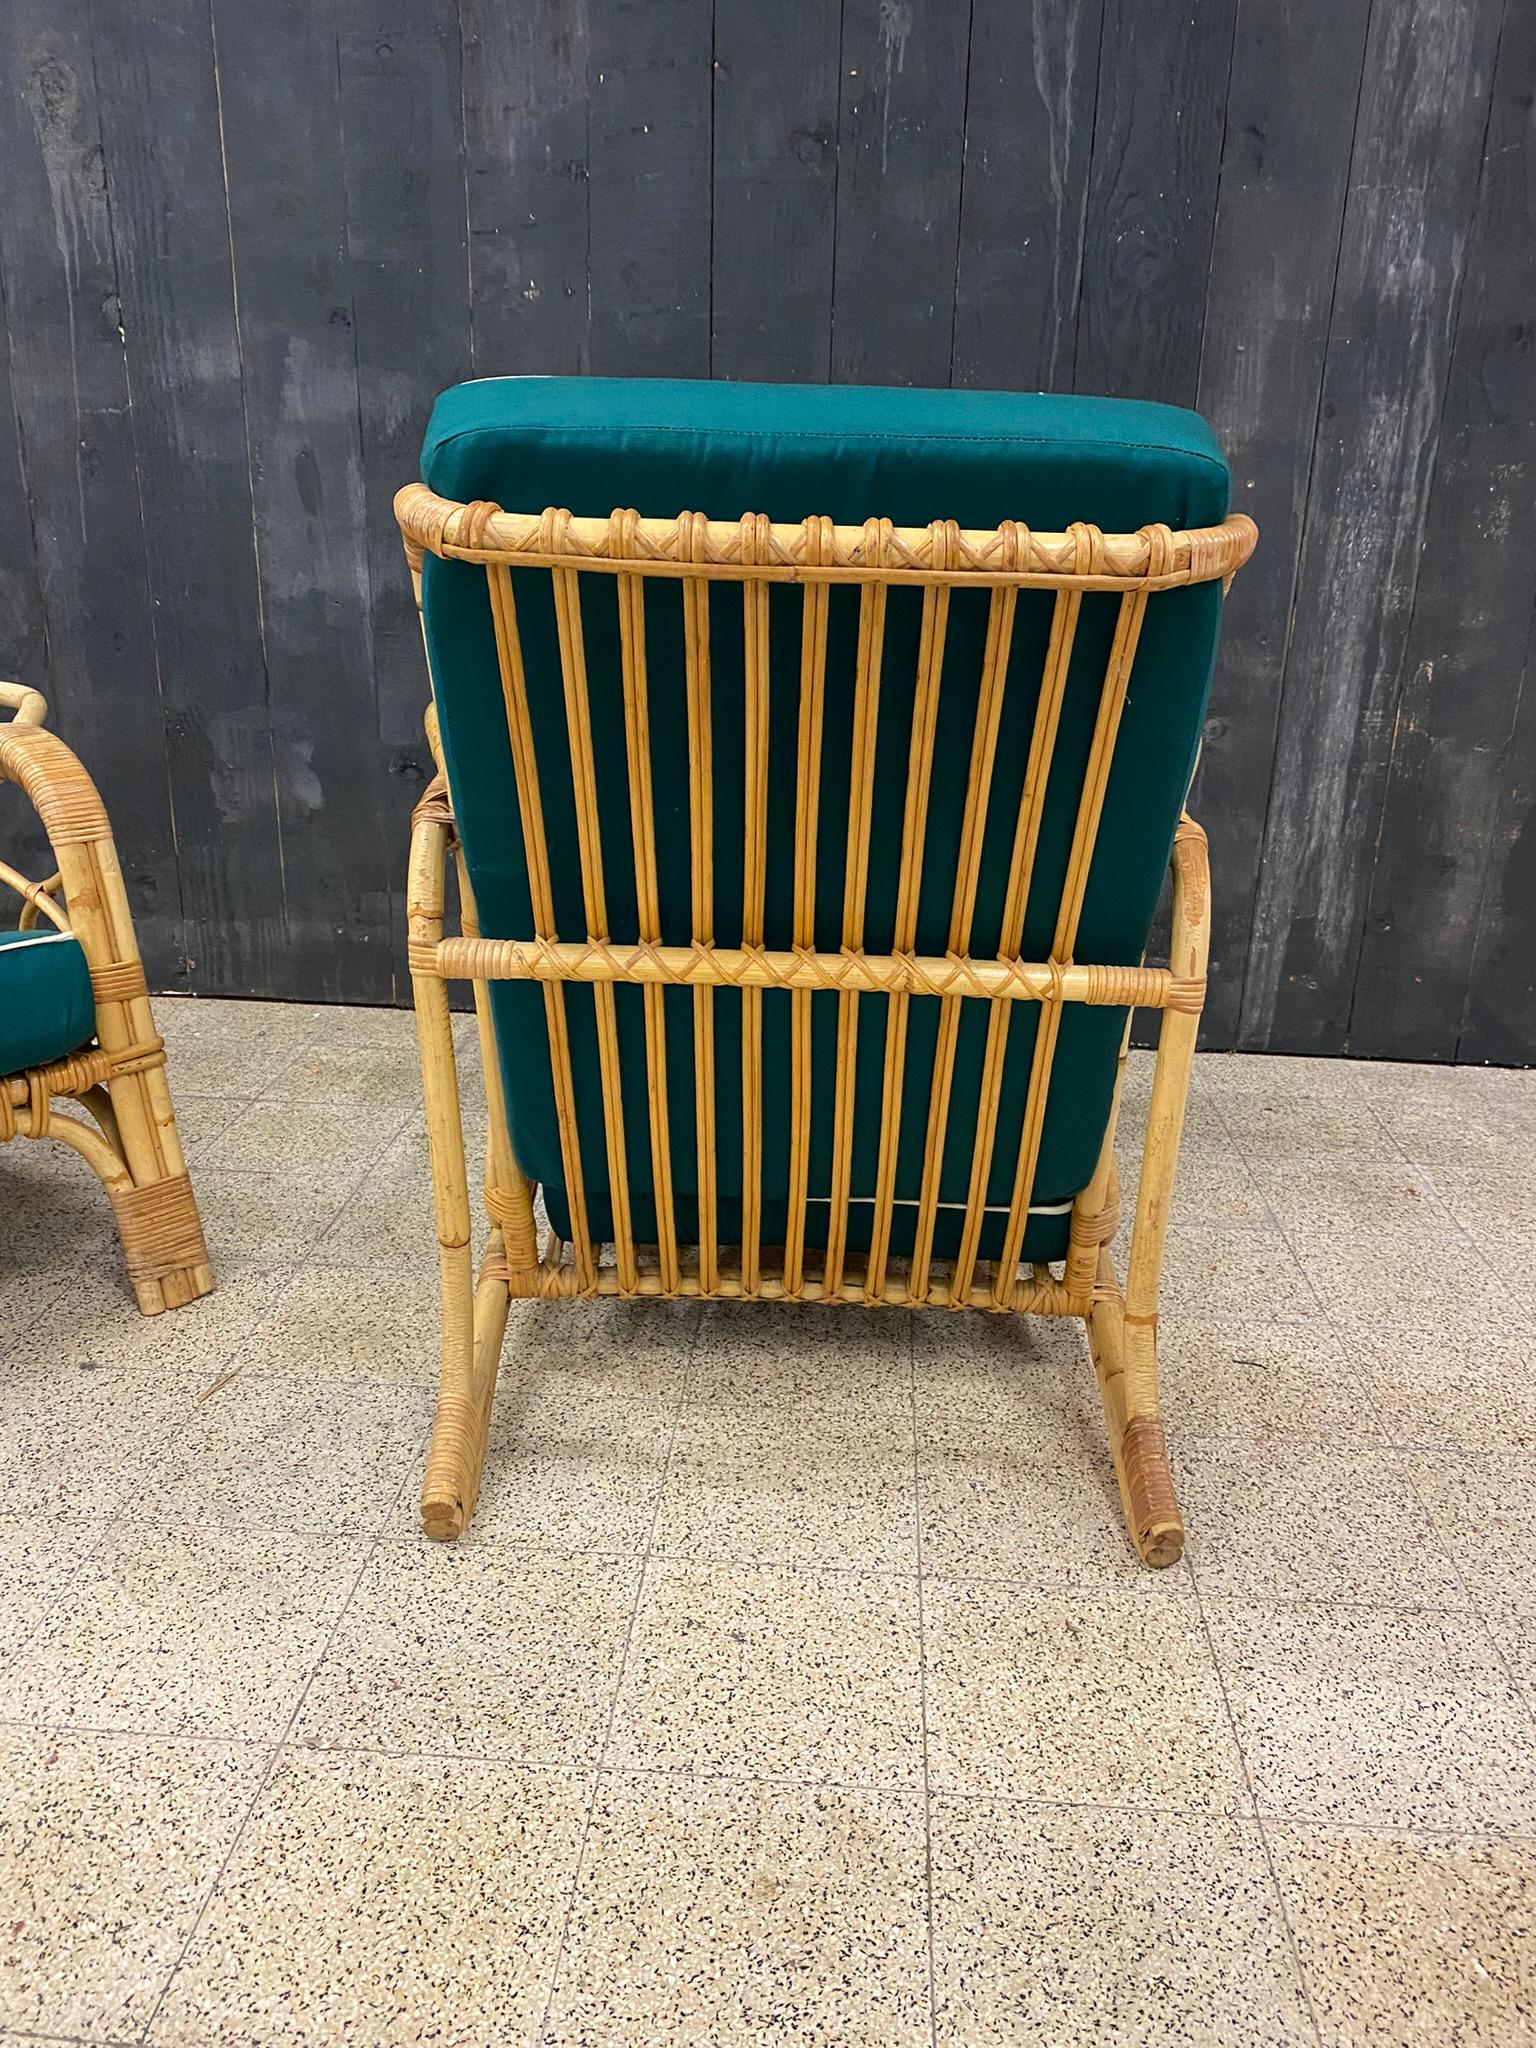 2 Bamboo and Rattan Armchairs and Their Cushions, circa 1970 For Sale 2